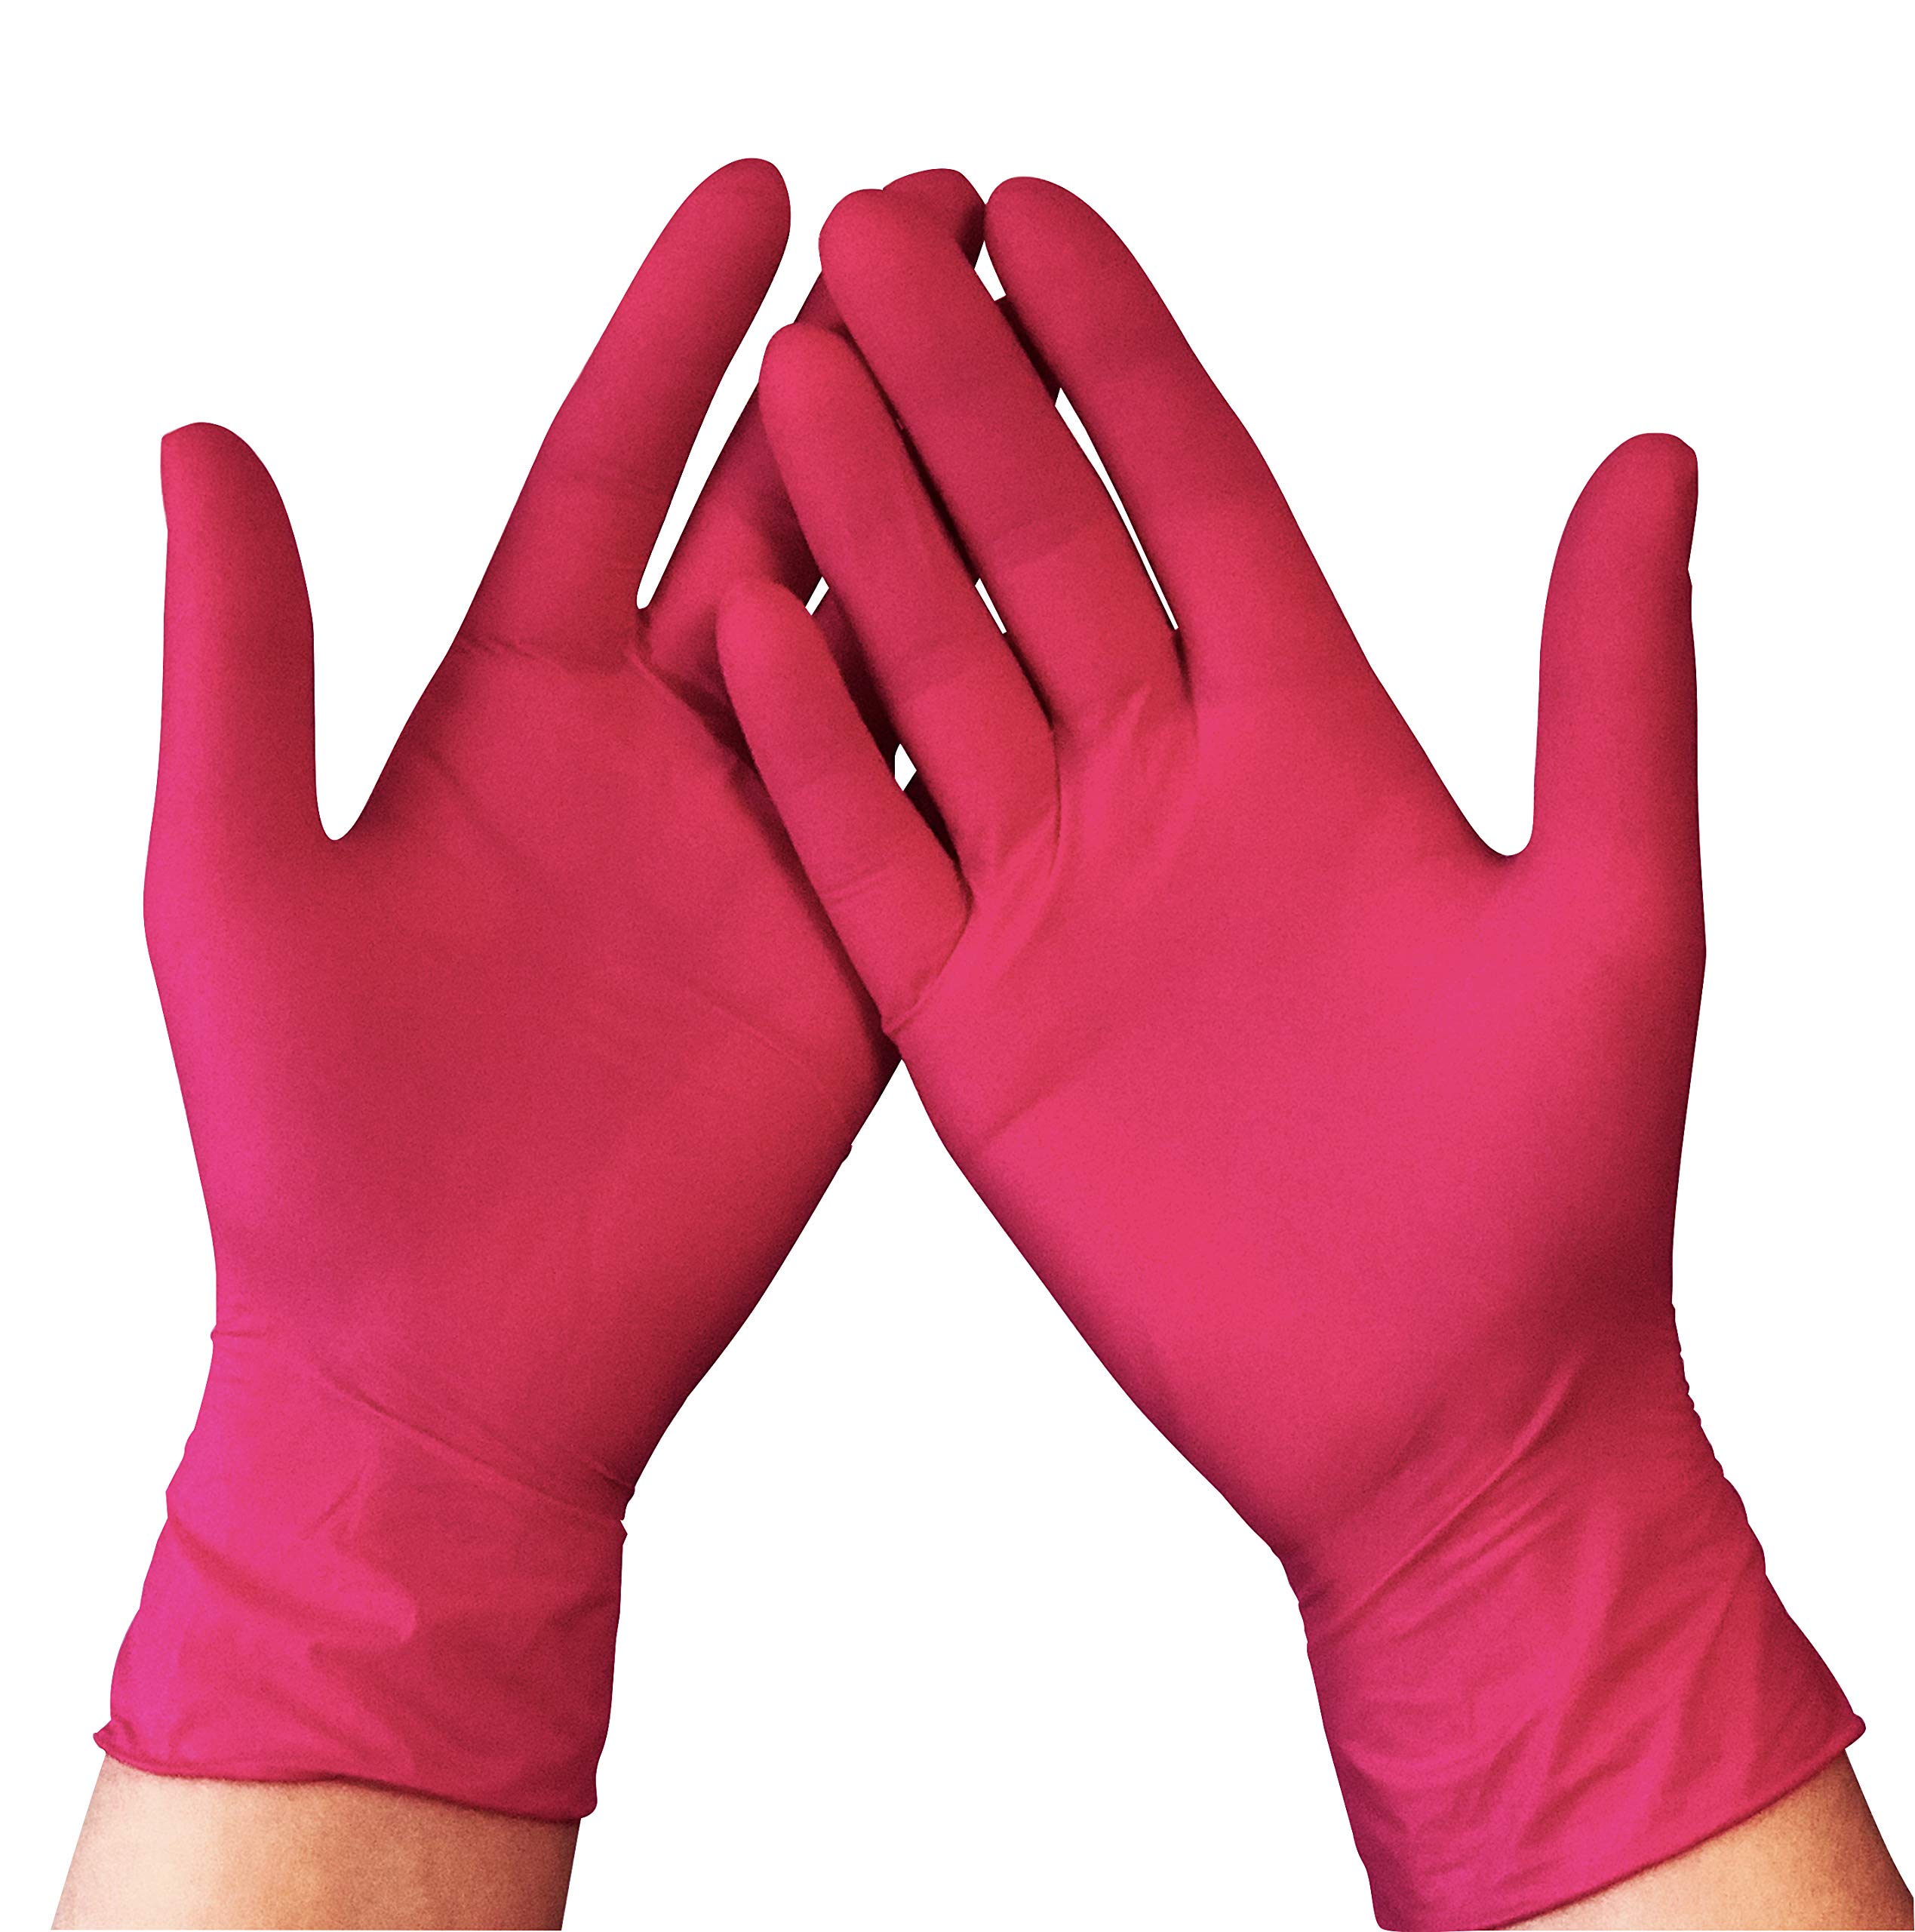 Top Supplier of Disposable Gloves and Latex Gloves for Businesses Worldwide